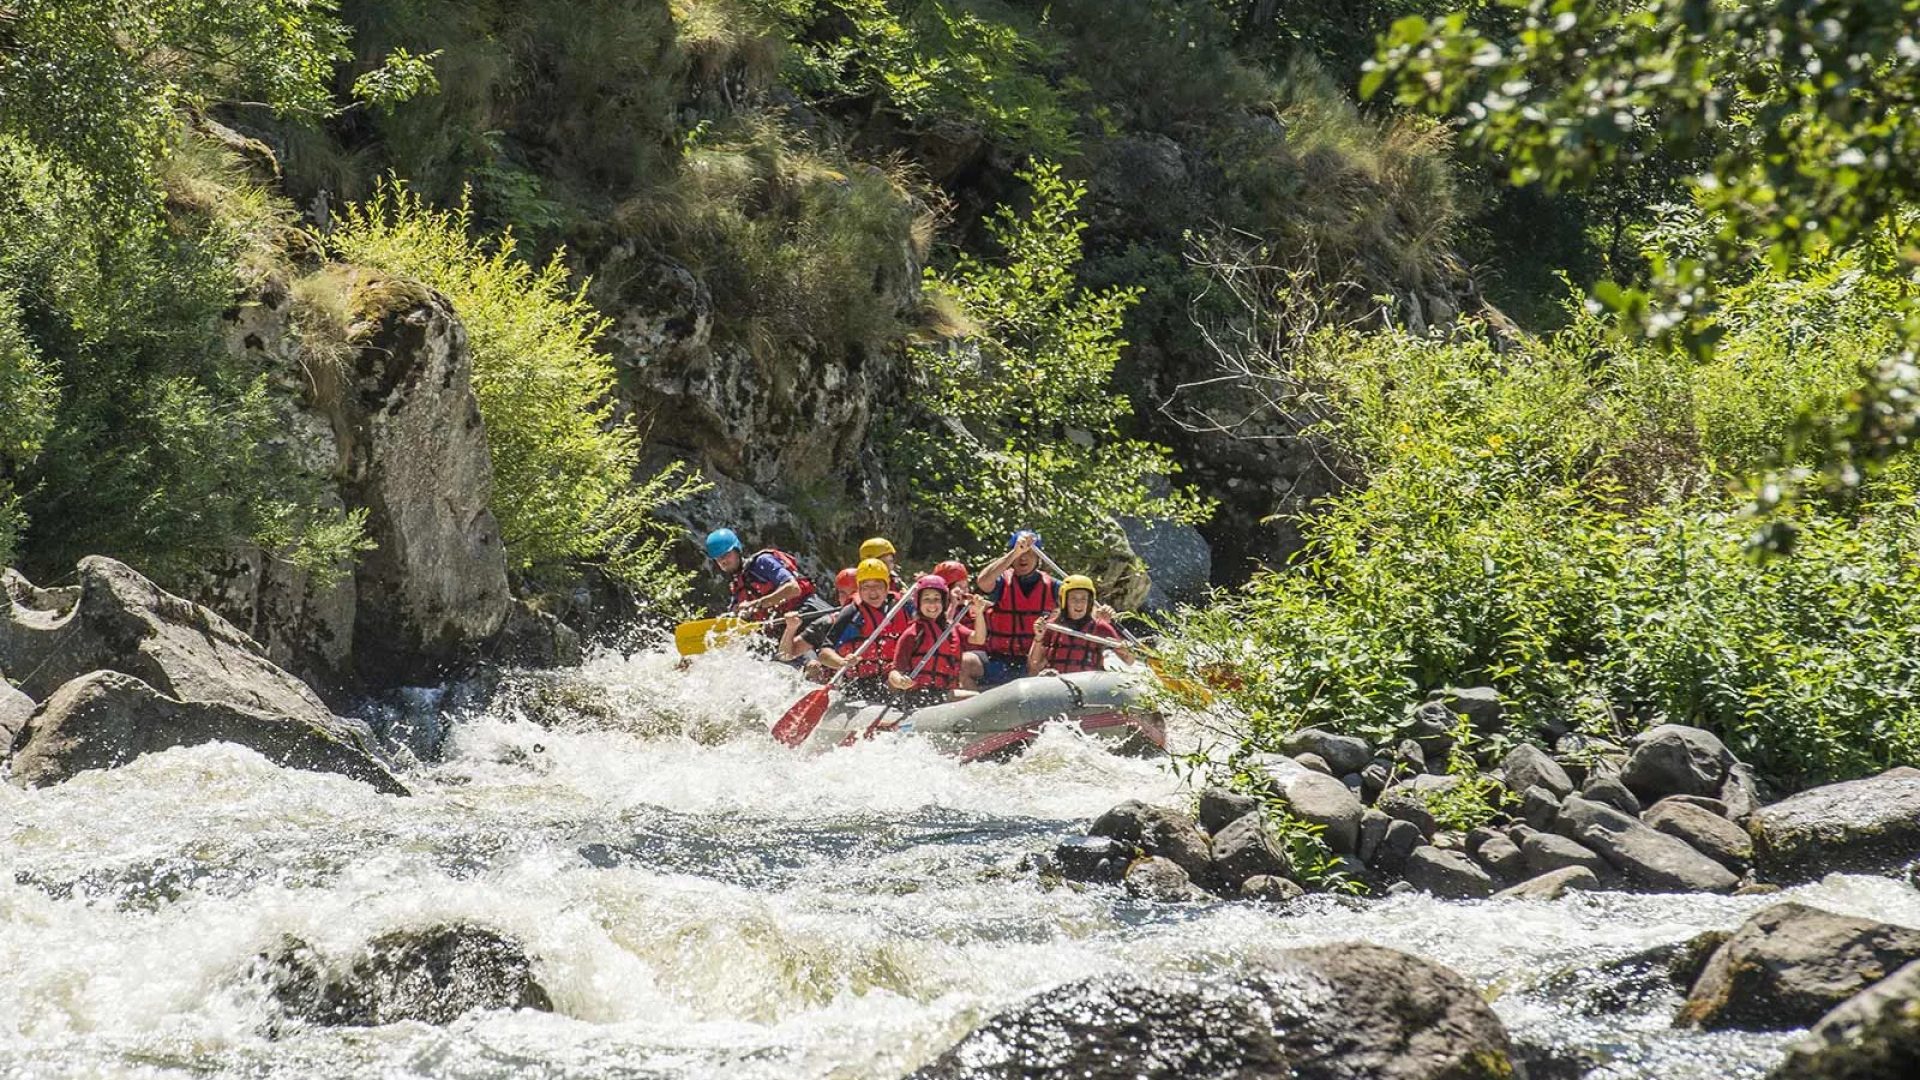 Paddling in the Allier, where the rafting salmon come up